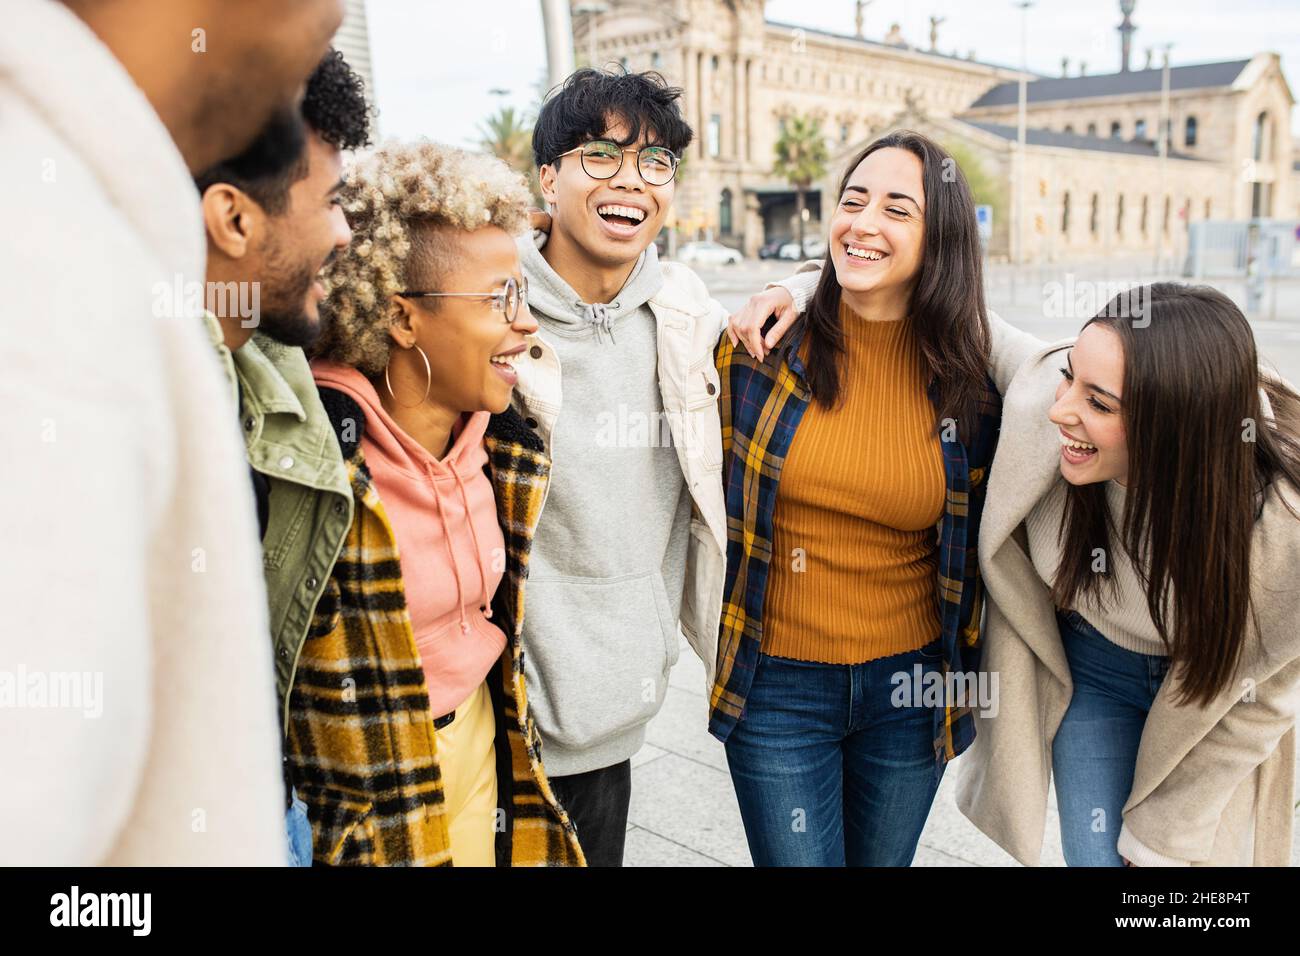 Group of multi ethnic young people having fun outdoors Stock Photo